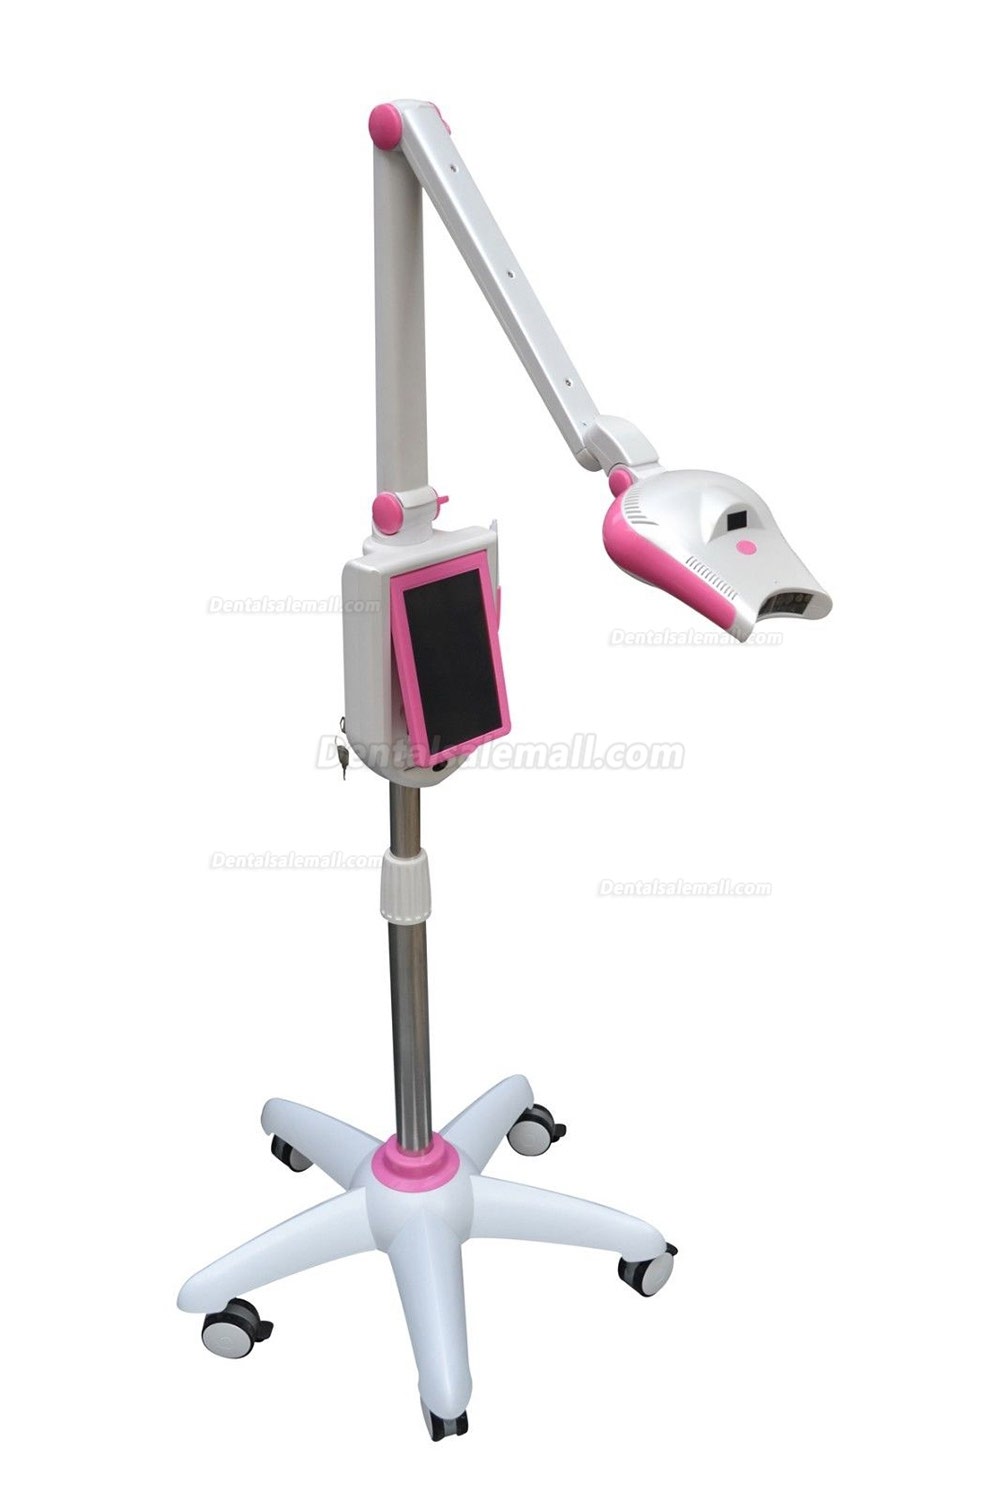 Proffessional Dental 7'' LCD LED Teeth Whitening System Bleaching Light Lamp with Camera